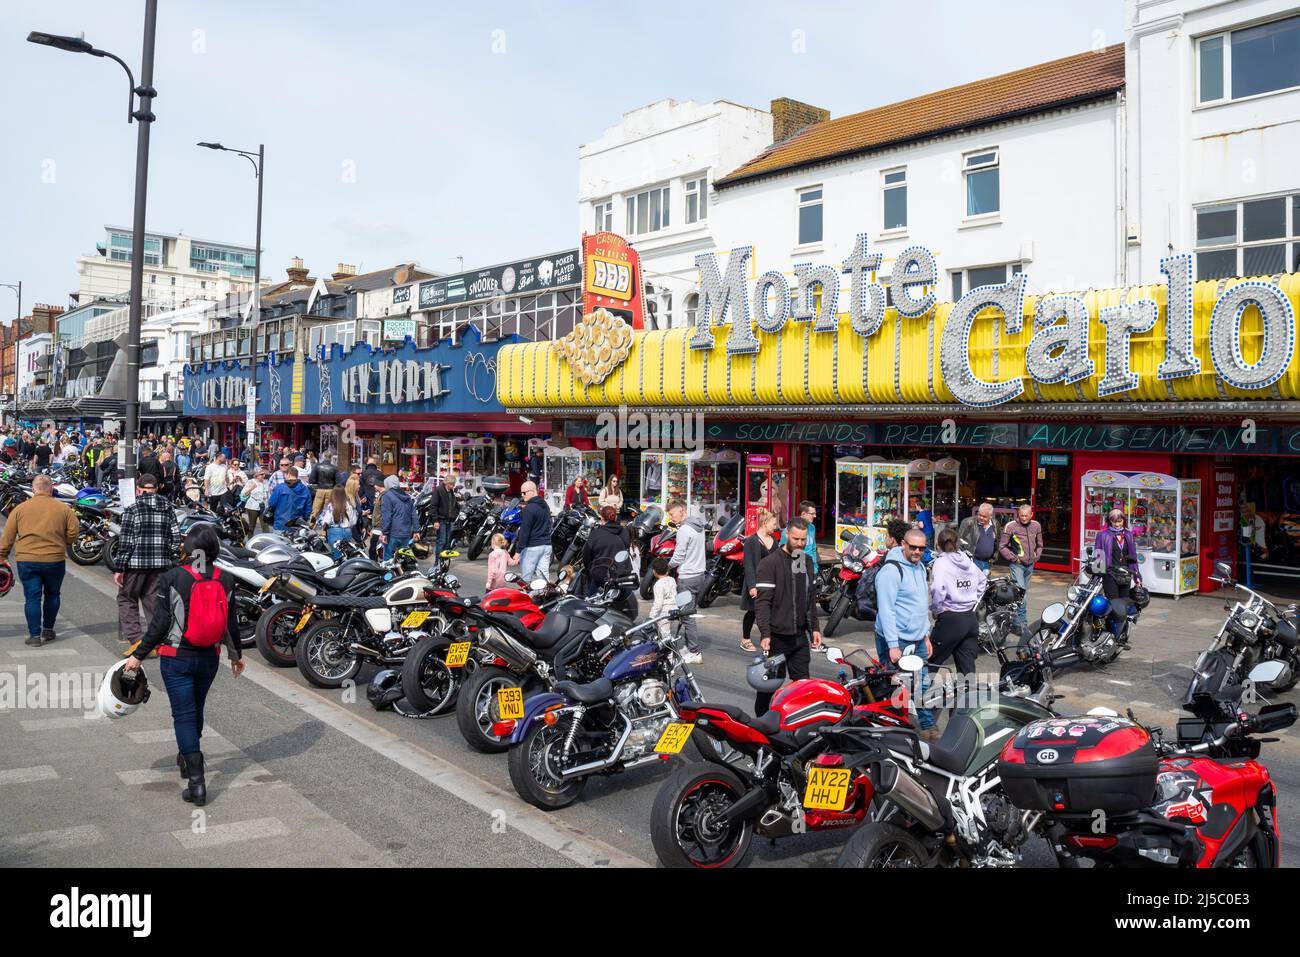 Southend Shakedown 2022 motorcycle gathering in Southend on Sea, Essex, UK. Rows of motorbikes lined up outside seafront amusement arcades Stock Photo